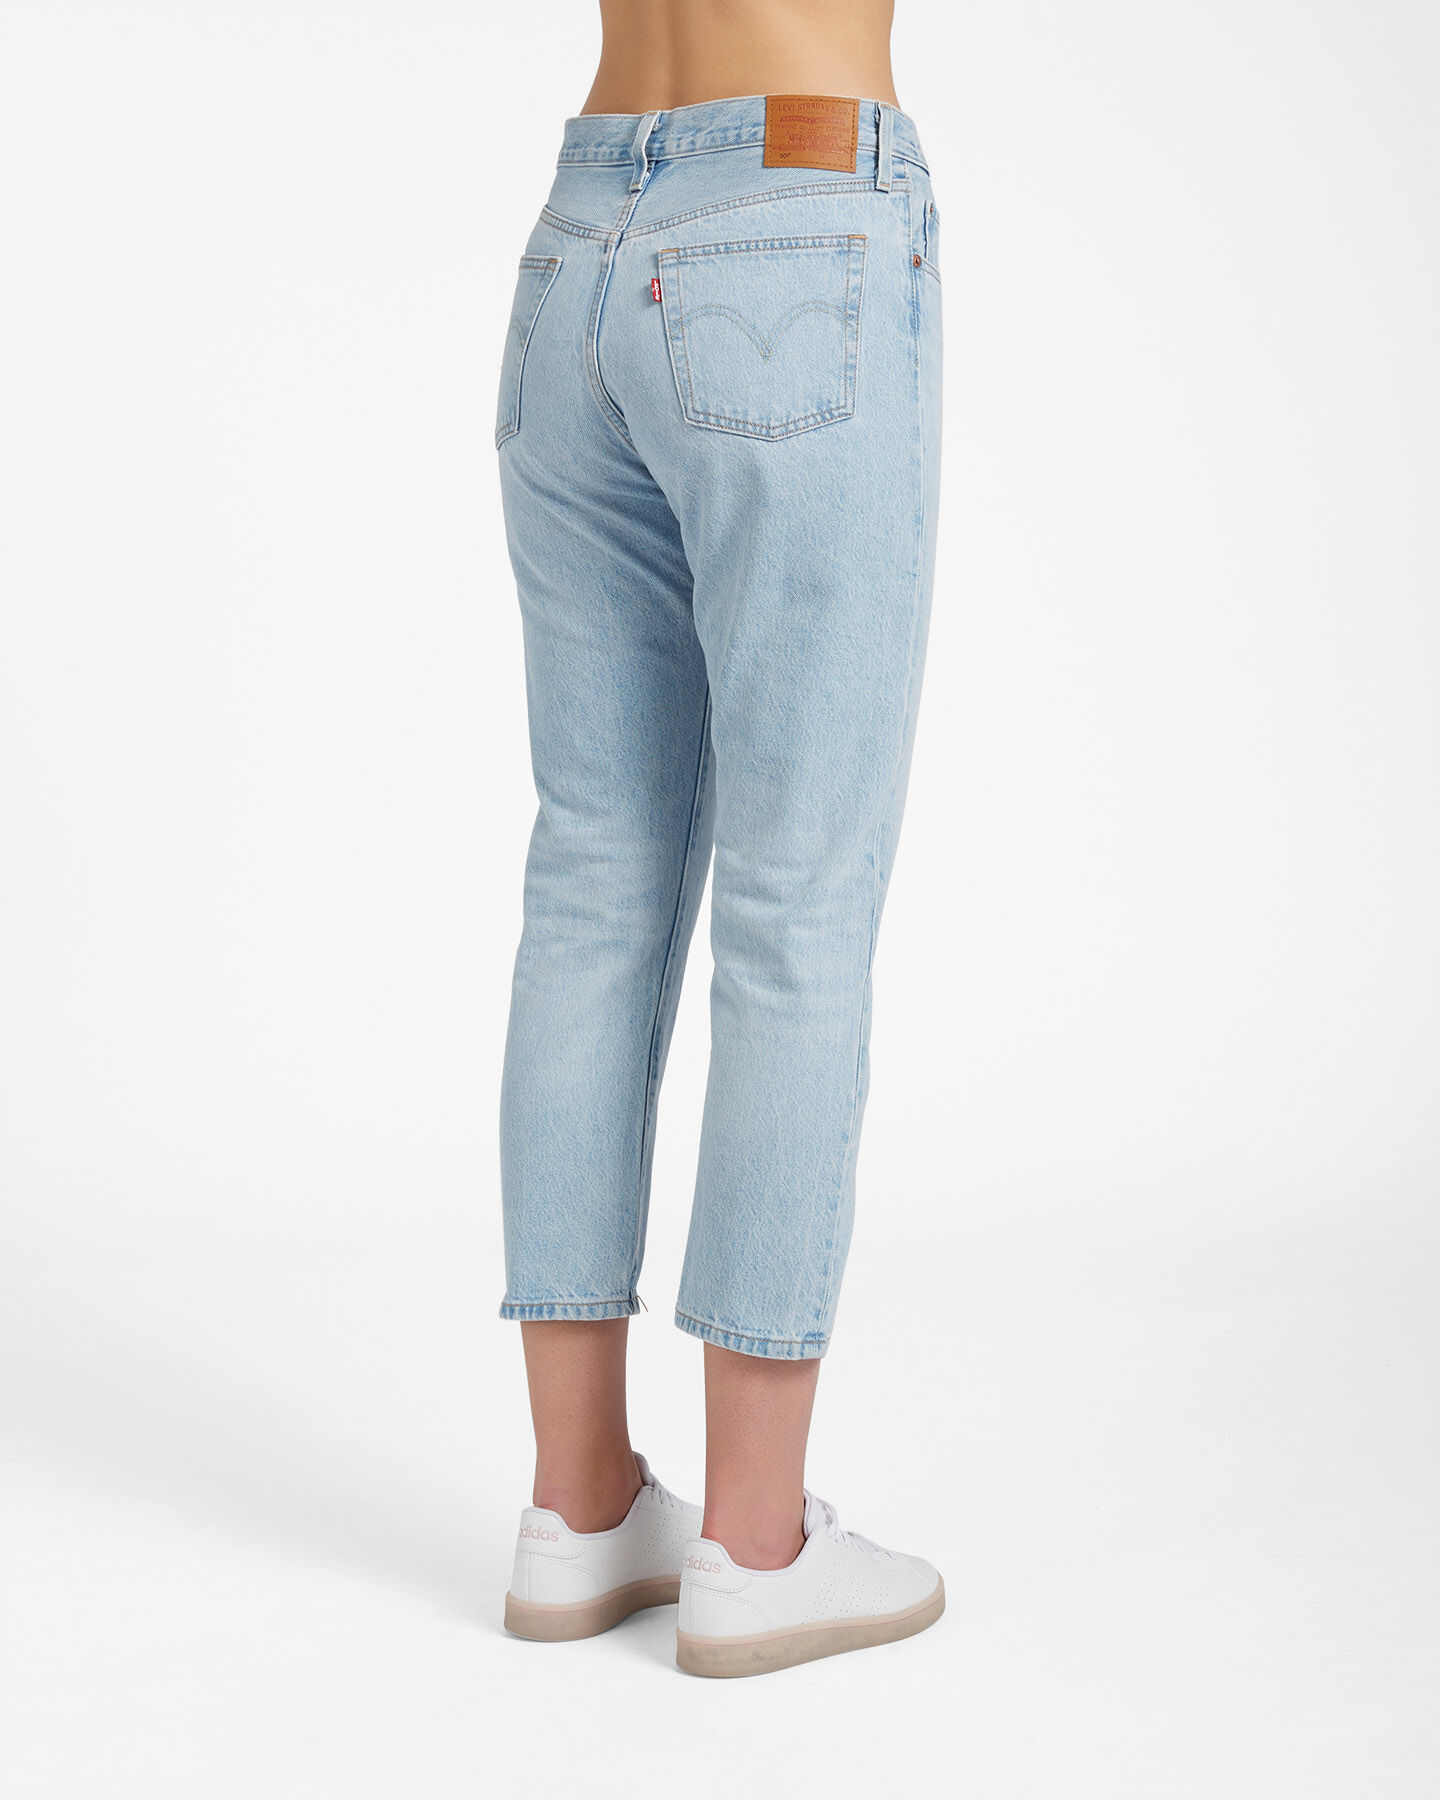  Jeans LEVI'S 501 CROP HIGH RISE L26 W S4088777|0124|26 scatto 1